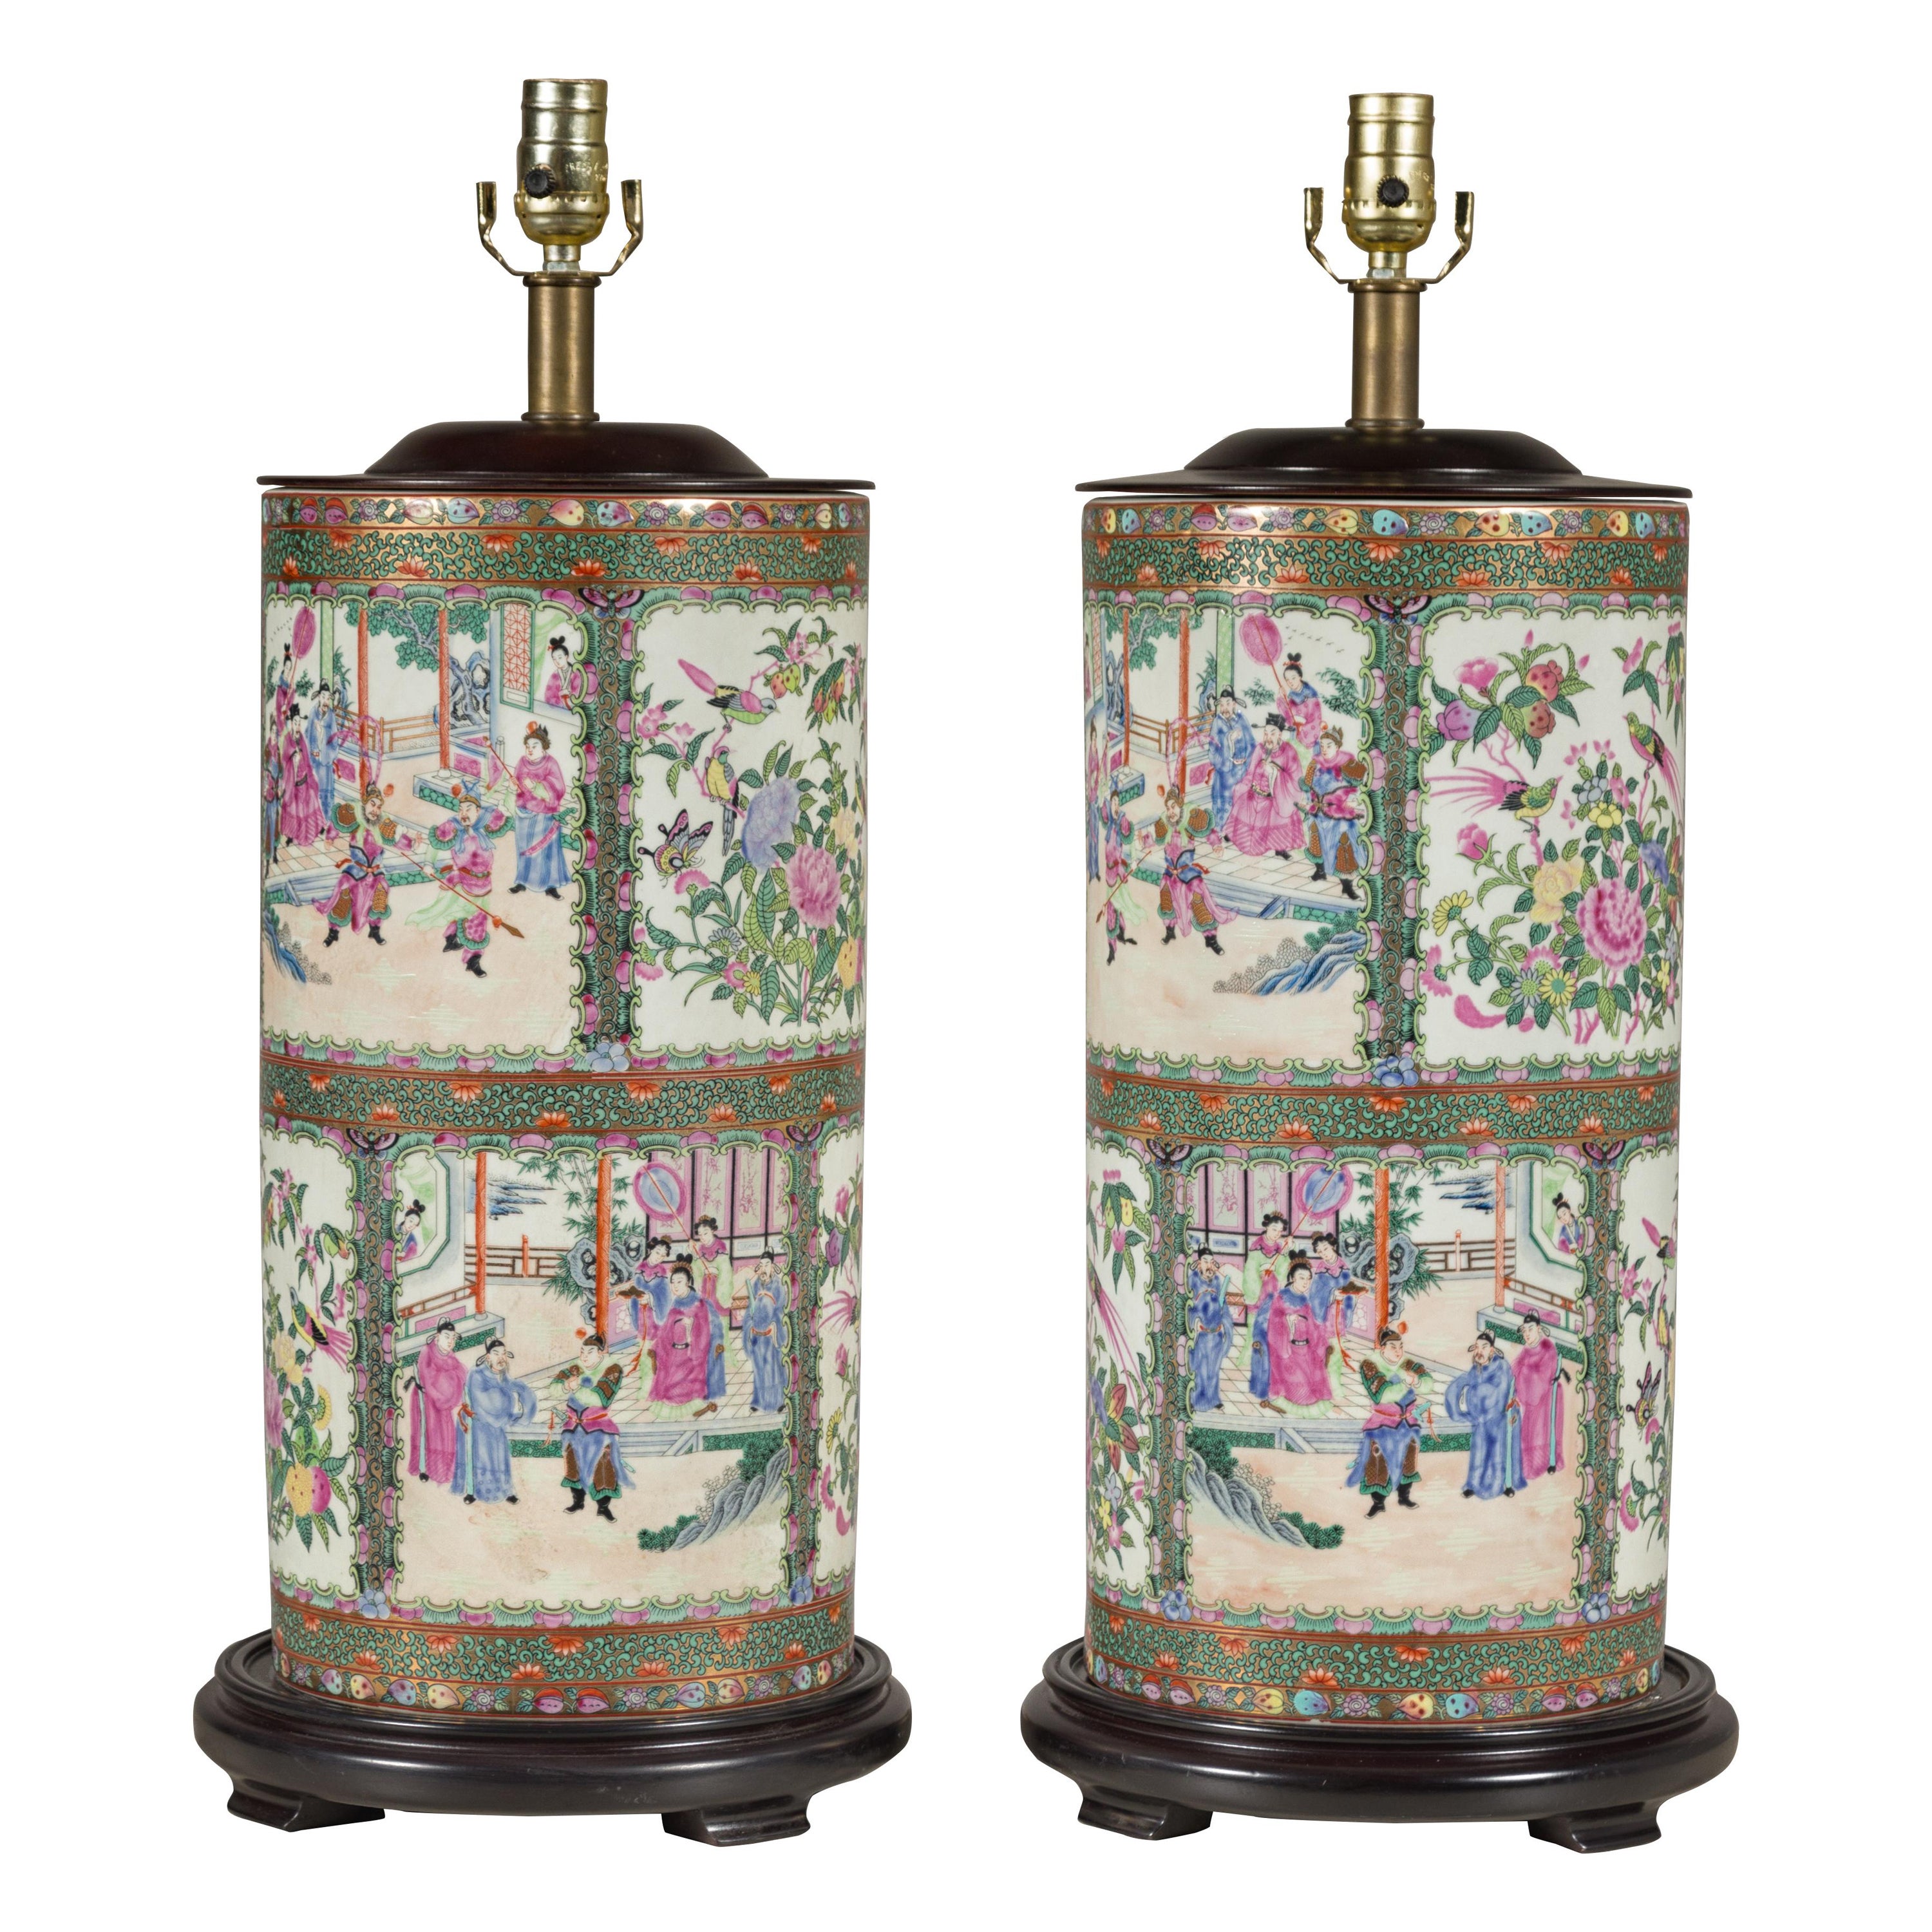 Pair of Hand-Painted Rose Medallion Table Lamps with Court Scenes and Birds